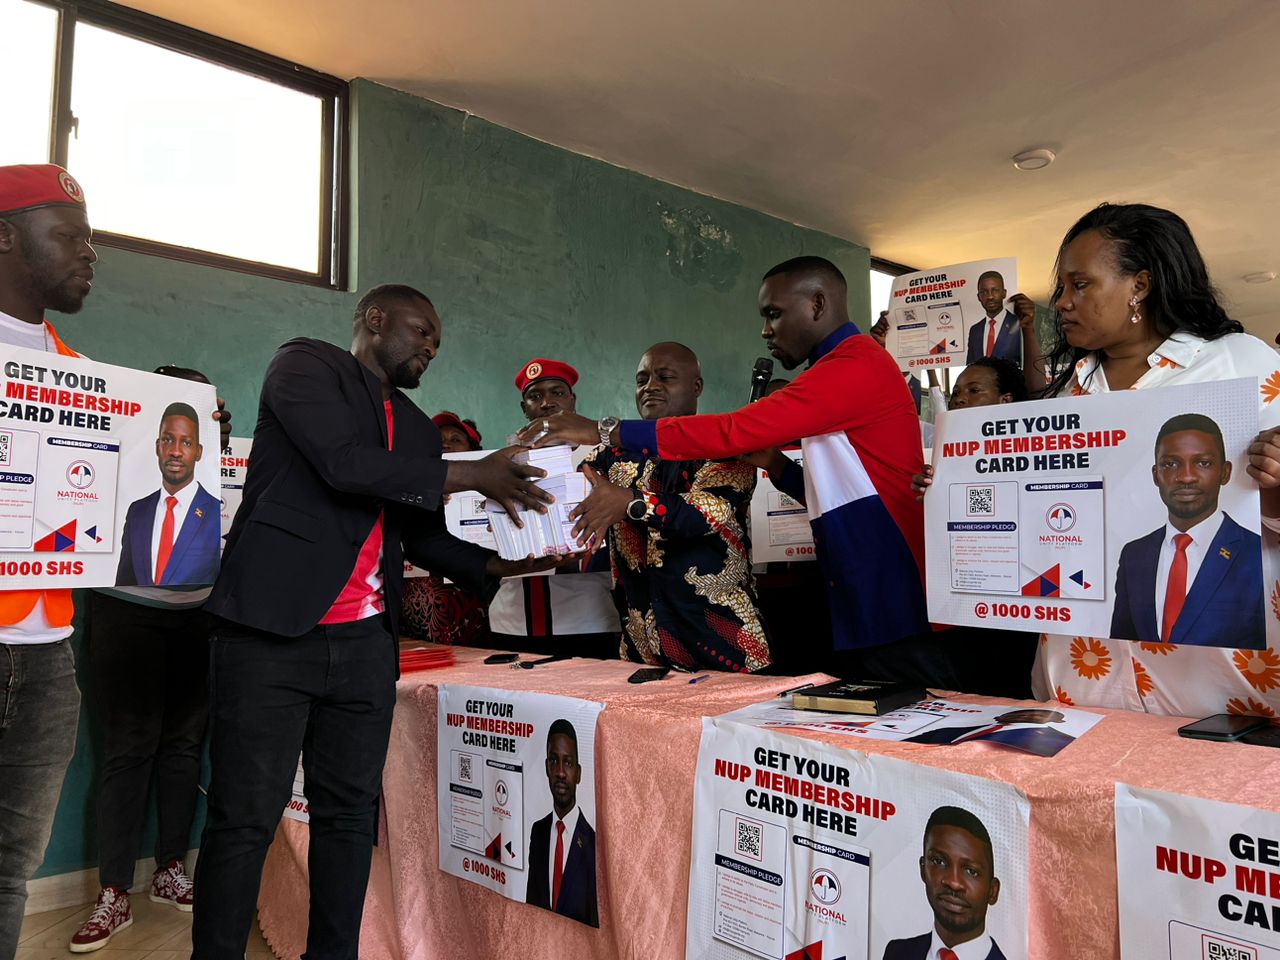 Ssenyonyi launches party membership registration drive in his constituency